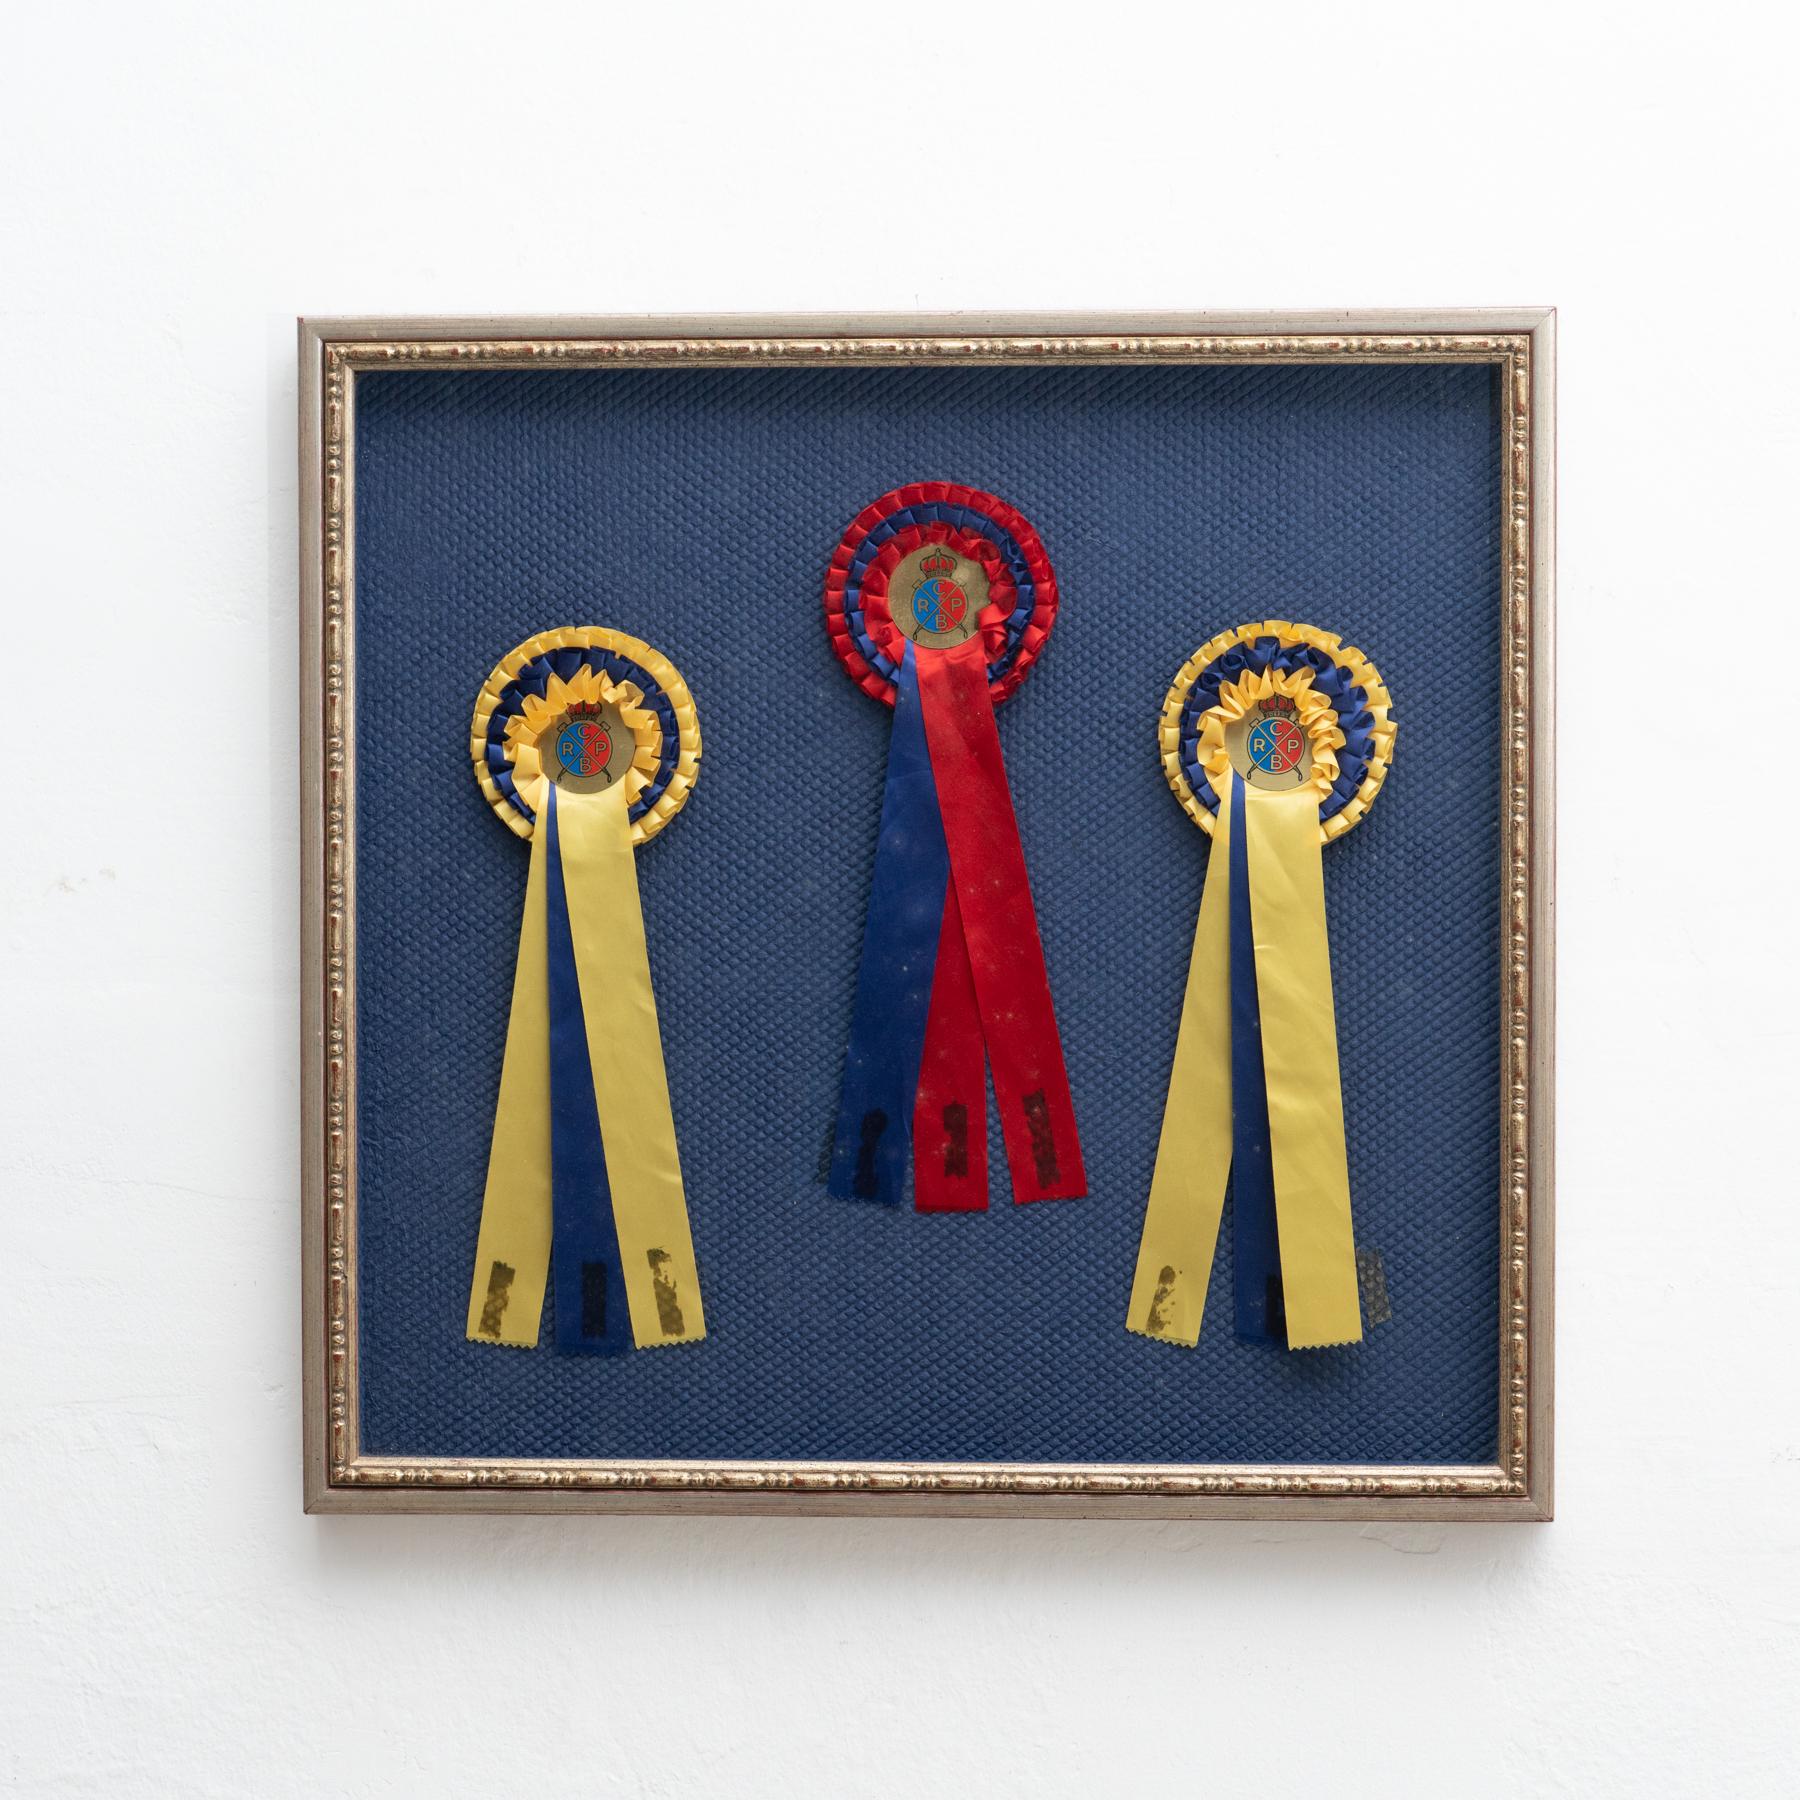 Vintage framed polo prizes by unknown artist, circa 1960.

Circa 1960, Spain.

In original condition, with minor wear consistent of age and use, preserving a beautiul patina.